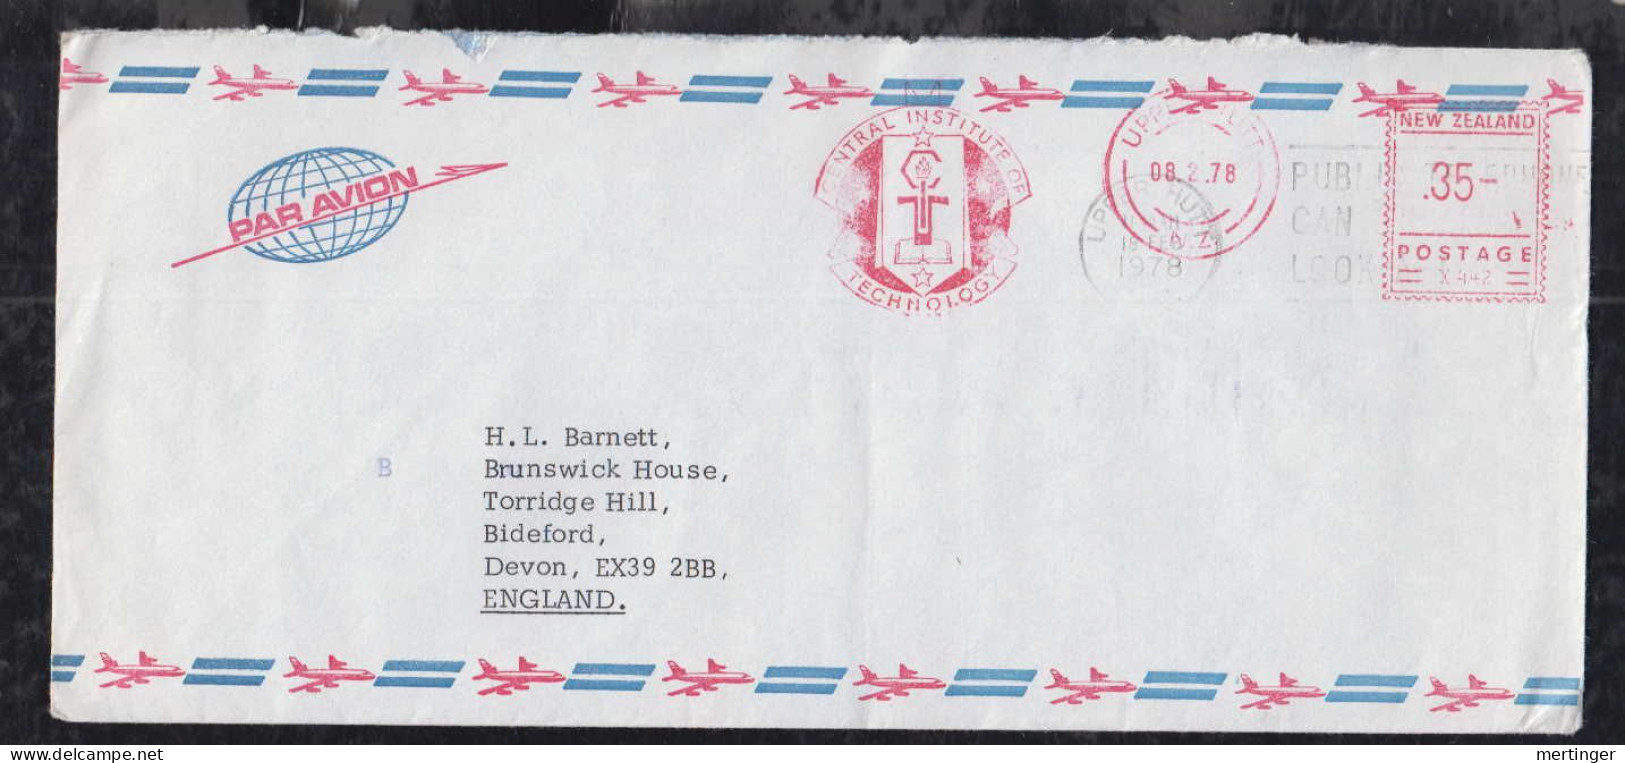 New Zealand 1978 Meter Airmail Cover 35c UPPER HUTT To Bideford England Central Institute Of Technology - Lettres & Documents